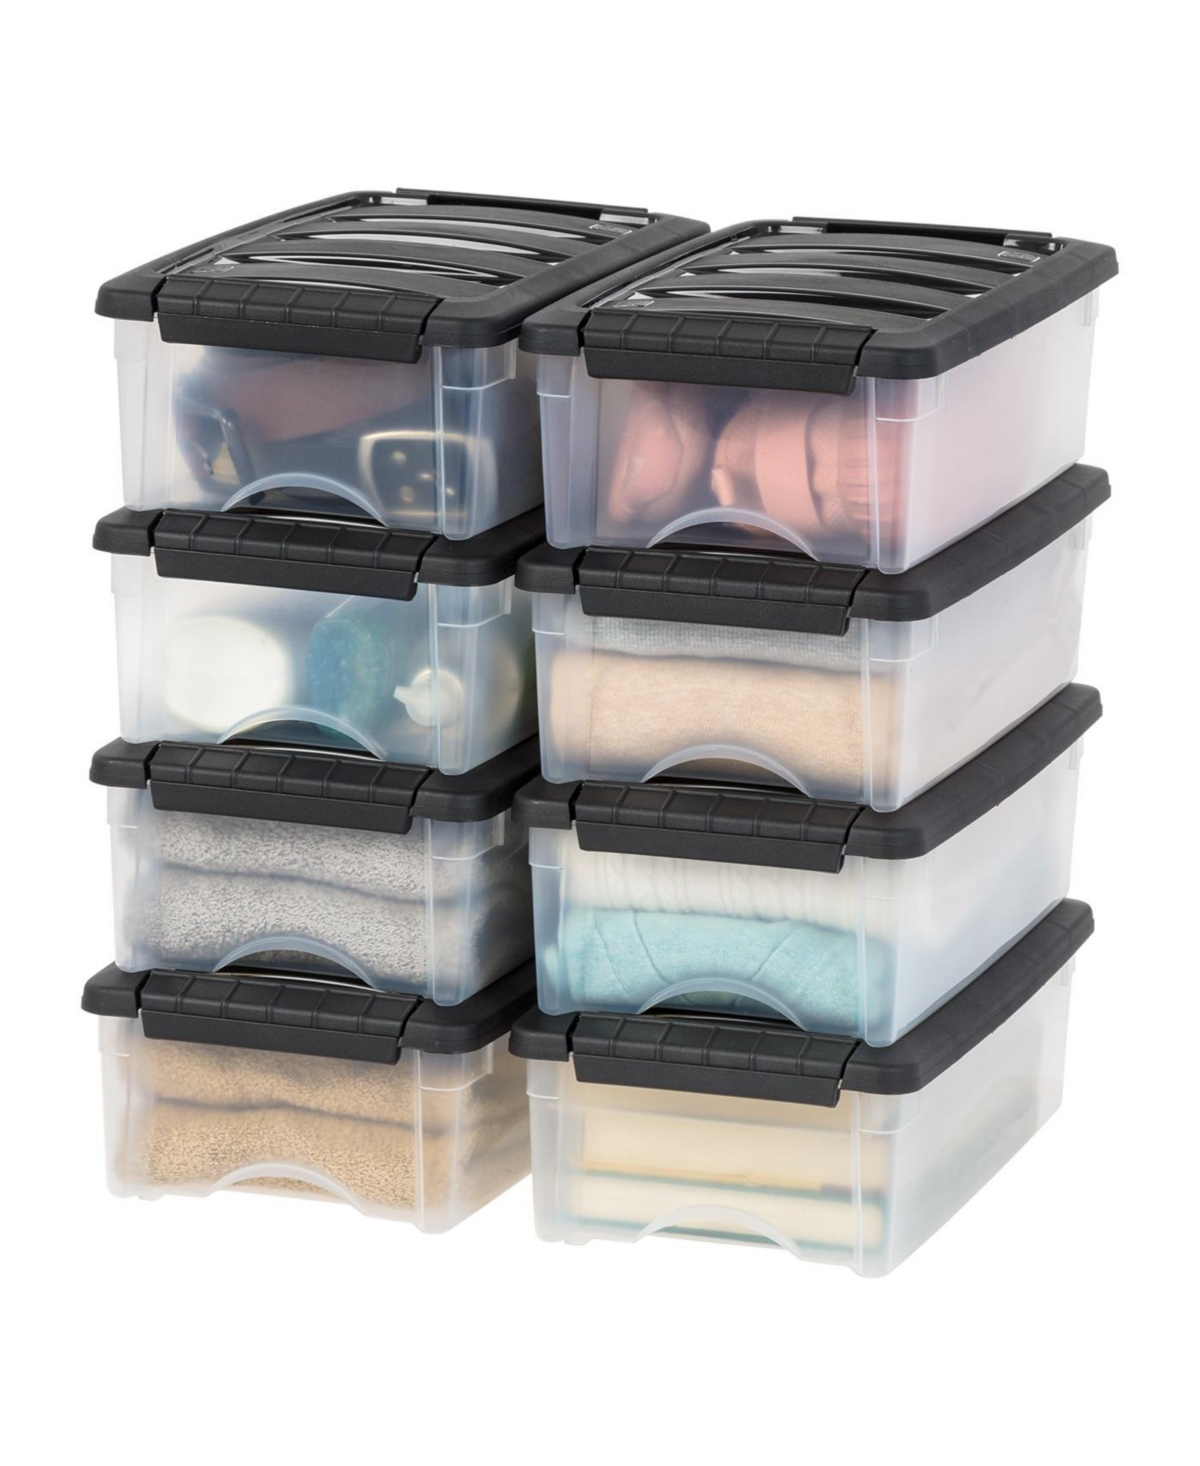 6 Qt Stackable Plastic Storage Bins with Lids, 8 Pack - Bpa-Free, Made in Usa - See-Through Organizing Solution, Latches, Durable Nestable Co